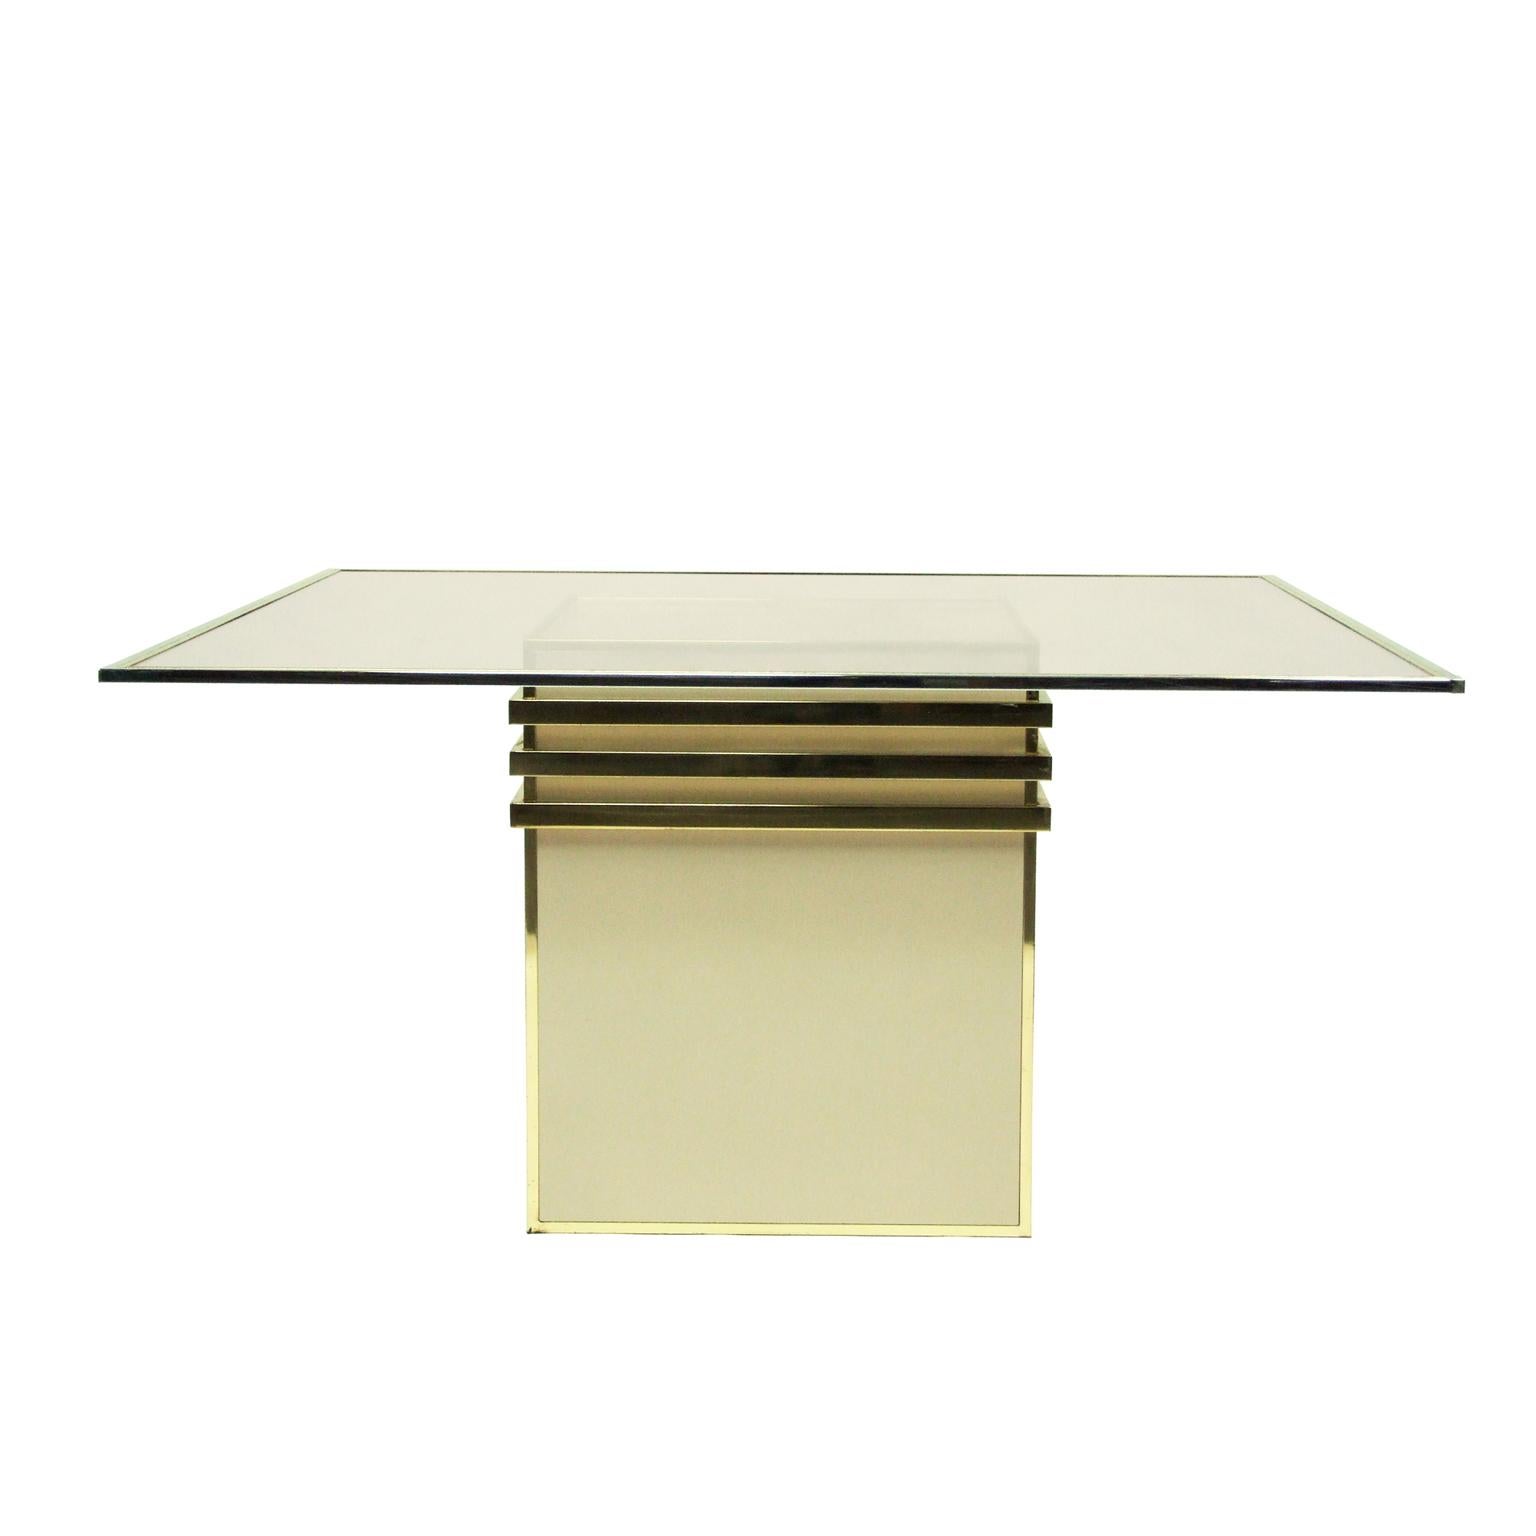 1970s Zevi Square Cream Glass and Brass Dining Table Italian In Fair Condition For Sale In Nottingham, Nottinghamshire